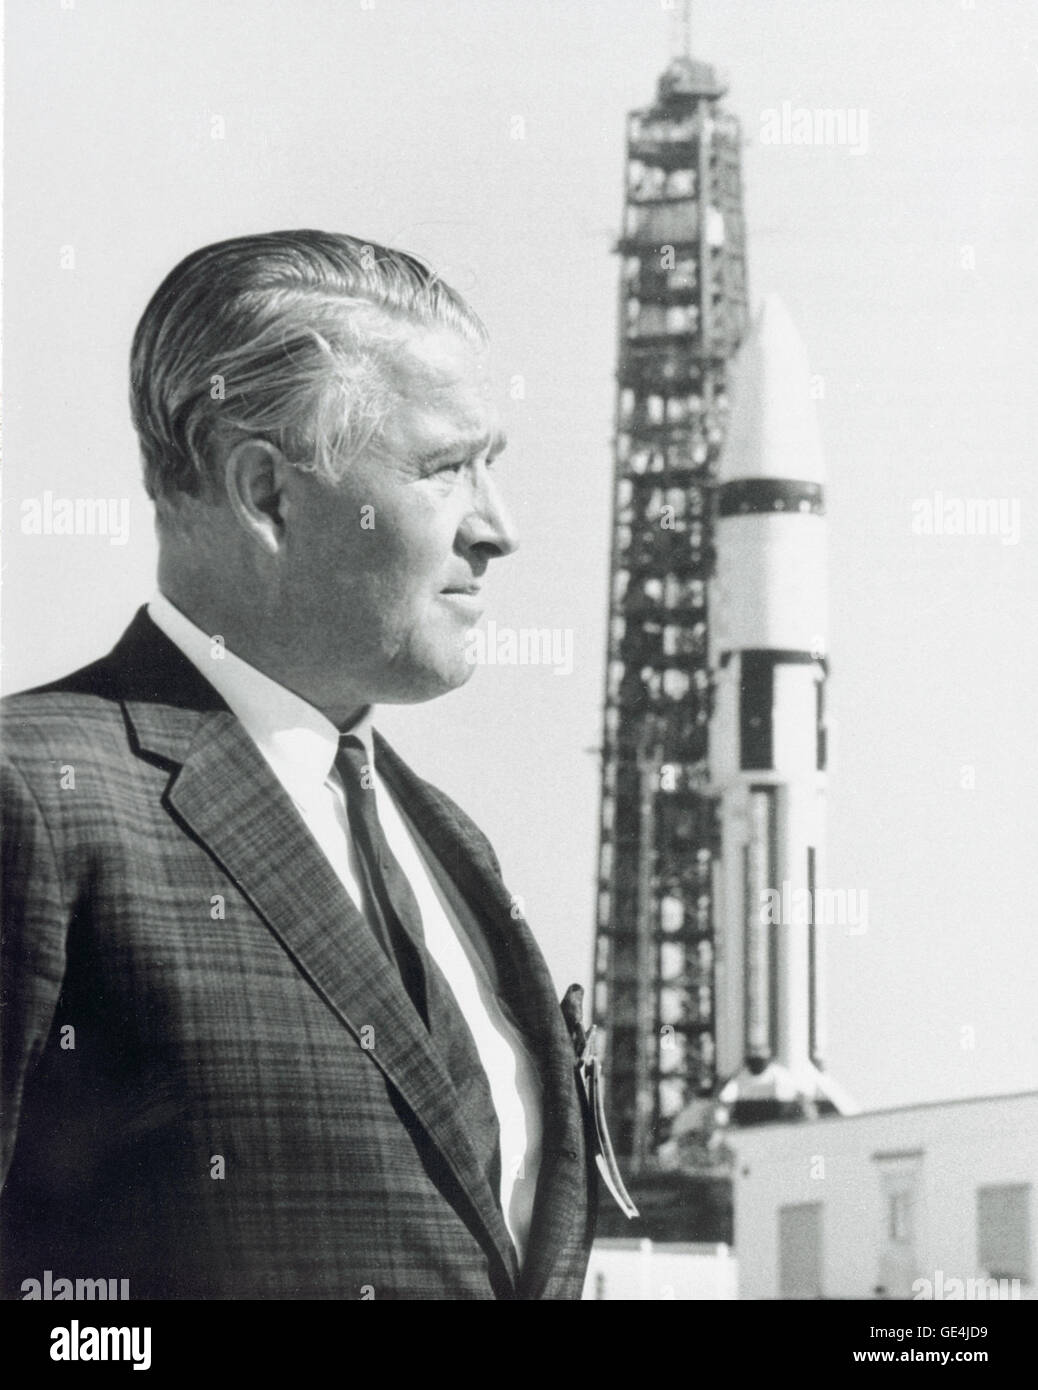 Dr. Wernher von Braun stands in front of a Saturn IB launch vehicle at Kennedy Space Flight Center. Dr. von Braun led a team of German rocket scientists, called the Rocket Team, to the United States, first to Fort Bliss/White Sands, later being transferred to the Army Ballistic Missile Agency at Redstone Arsenal in Huntsville, Alabama. They were further transferred to the newly established NASA/Marshall Space Flight Center (MSFC) in Huntsville, Alabama in 1960, and Dr. von Braun became the first Center Director. Under von Braun's direction, MSFC developed the Mercury-Redstone, which put the fi Stock Photo